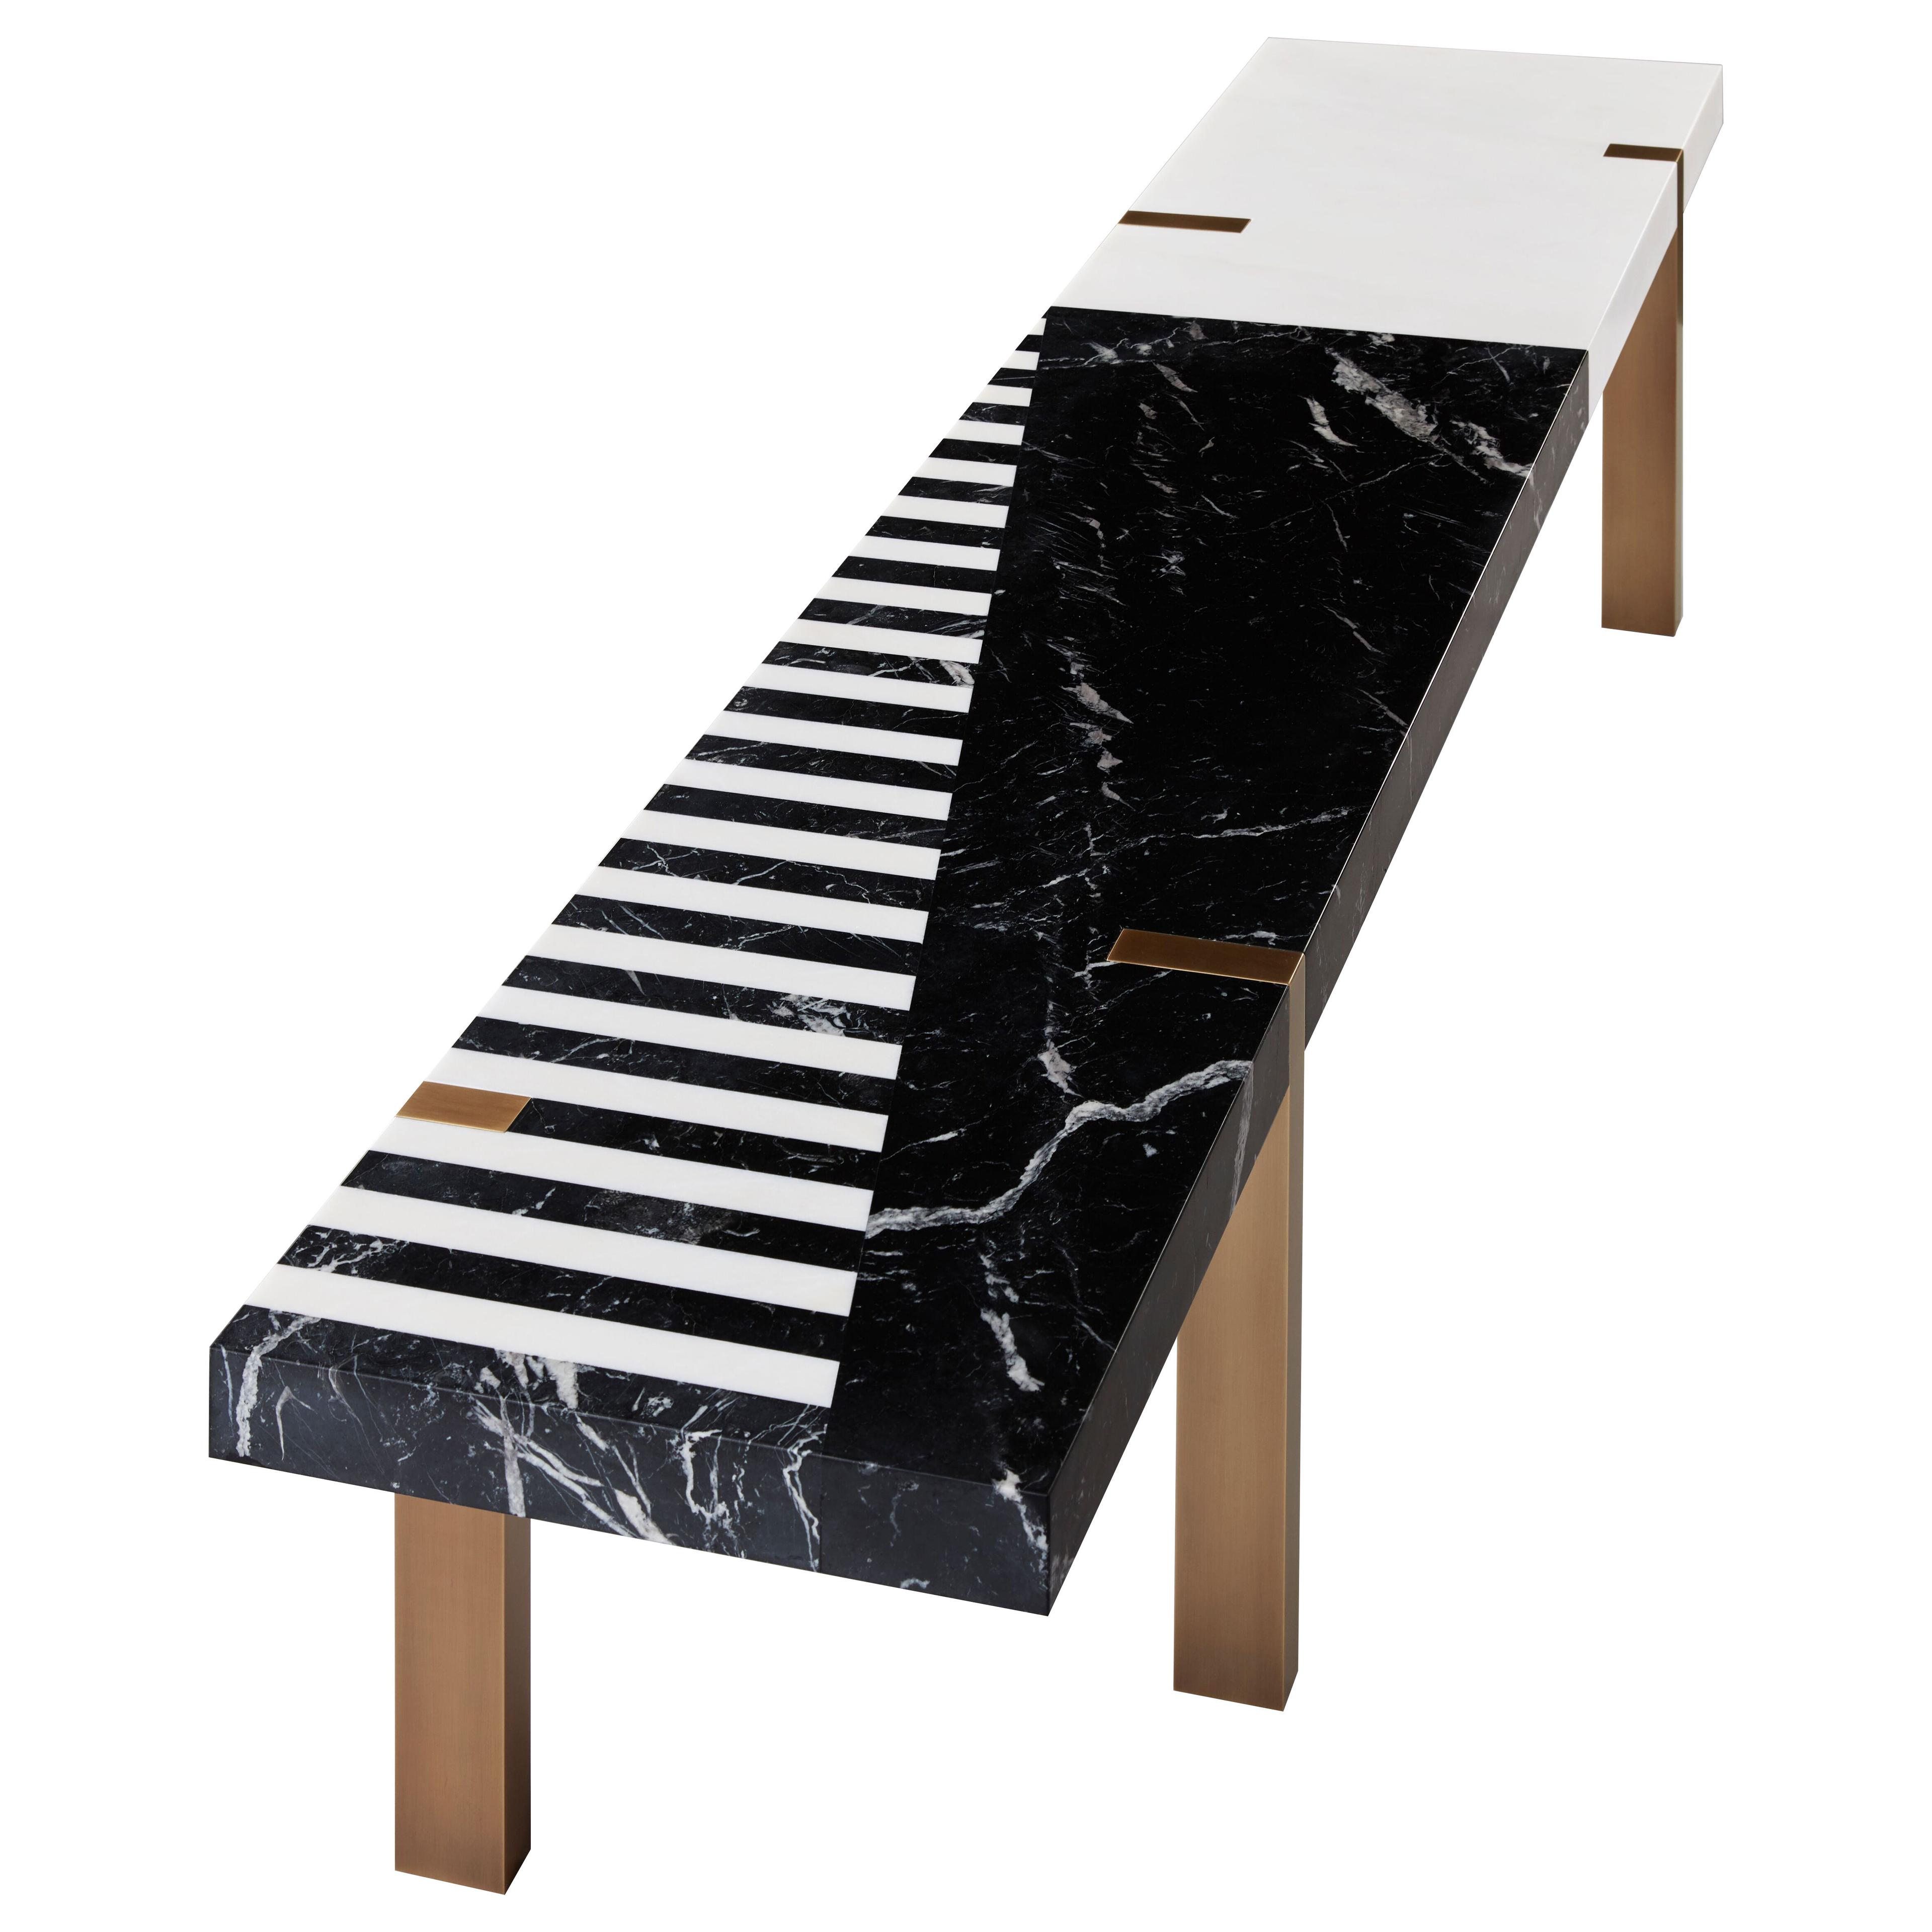 'Ellipse' Bench by Isabelle Stanislas featuring a Black and White Striped Motif